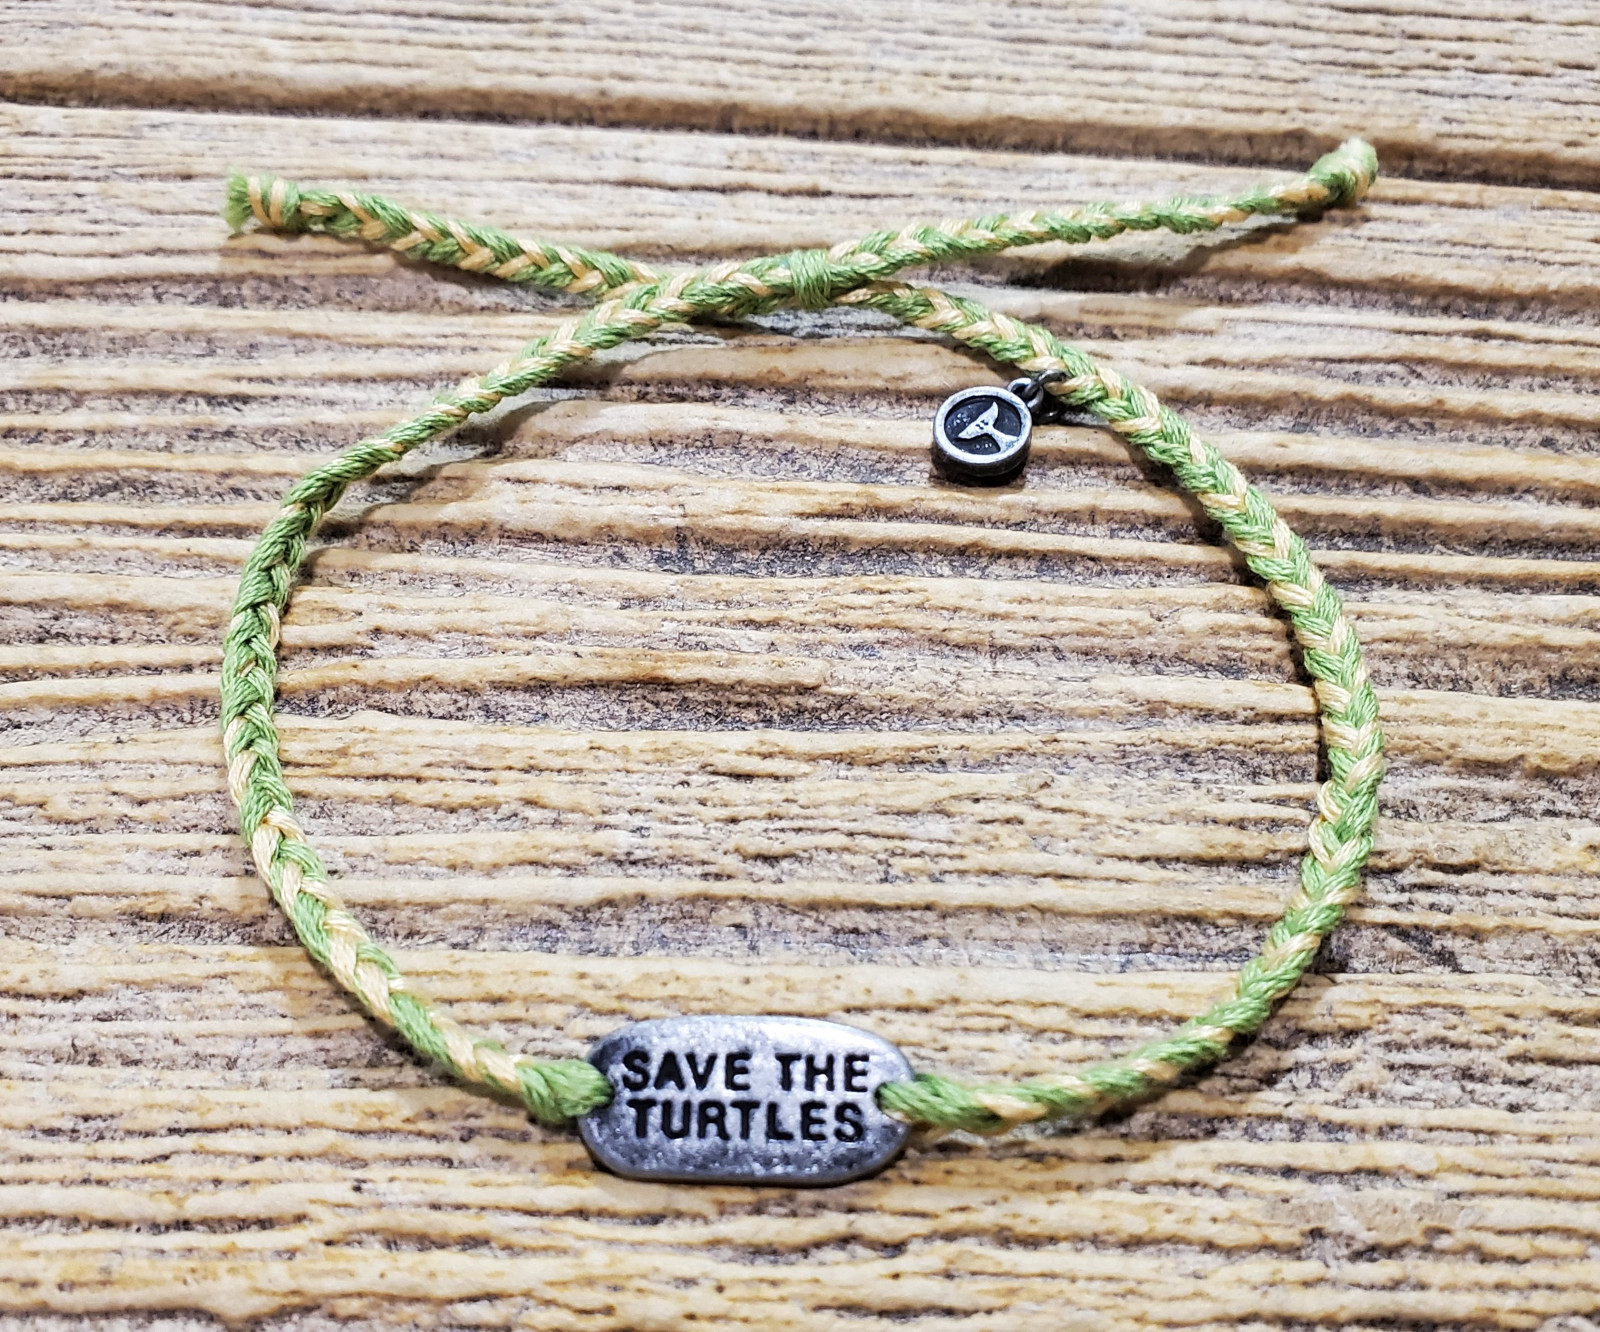 Bote Vakant bauen armband save the turtles Lotterie Sonnig Witzig